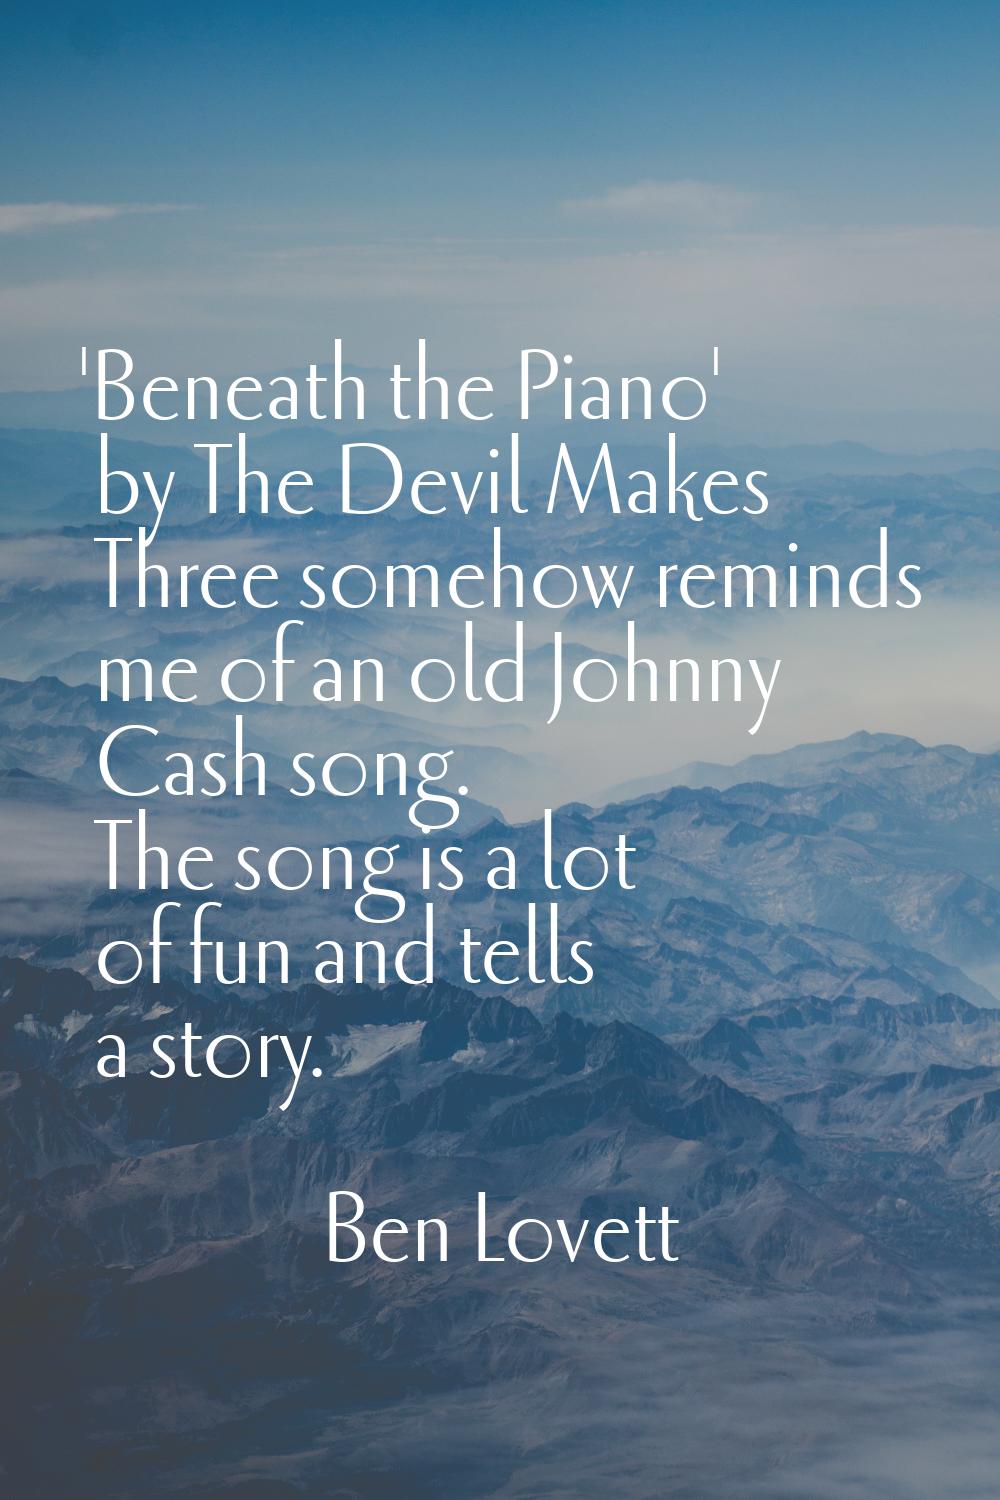 'Beneath the Piano' by The Devil Makes Three somehow reminds me of an old Johnny Cash song. The son